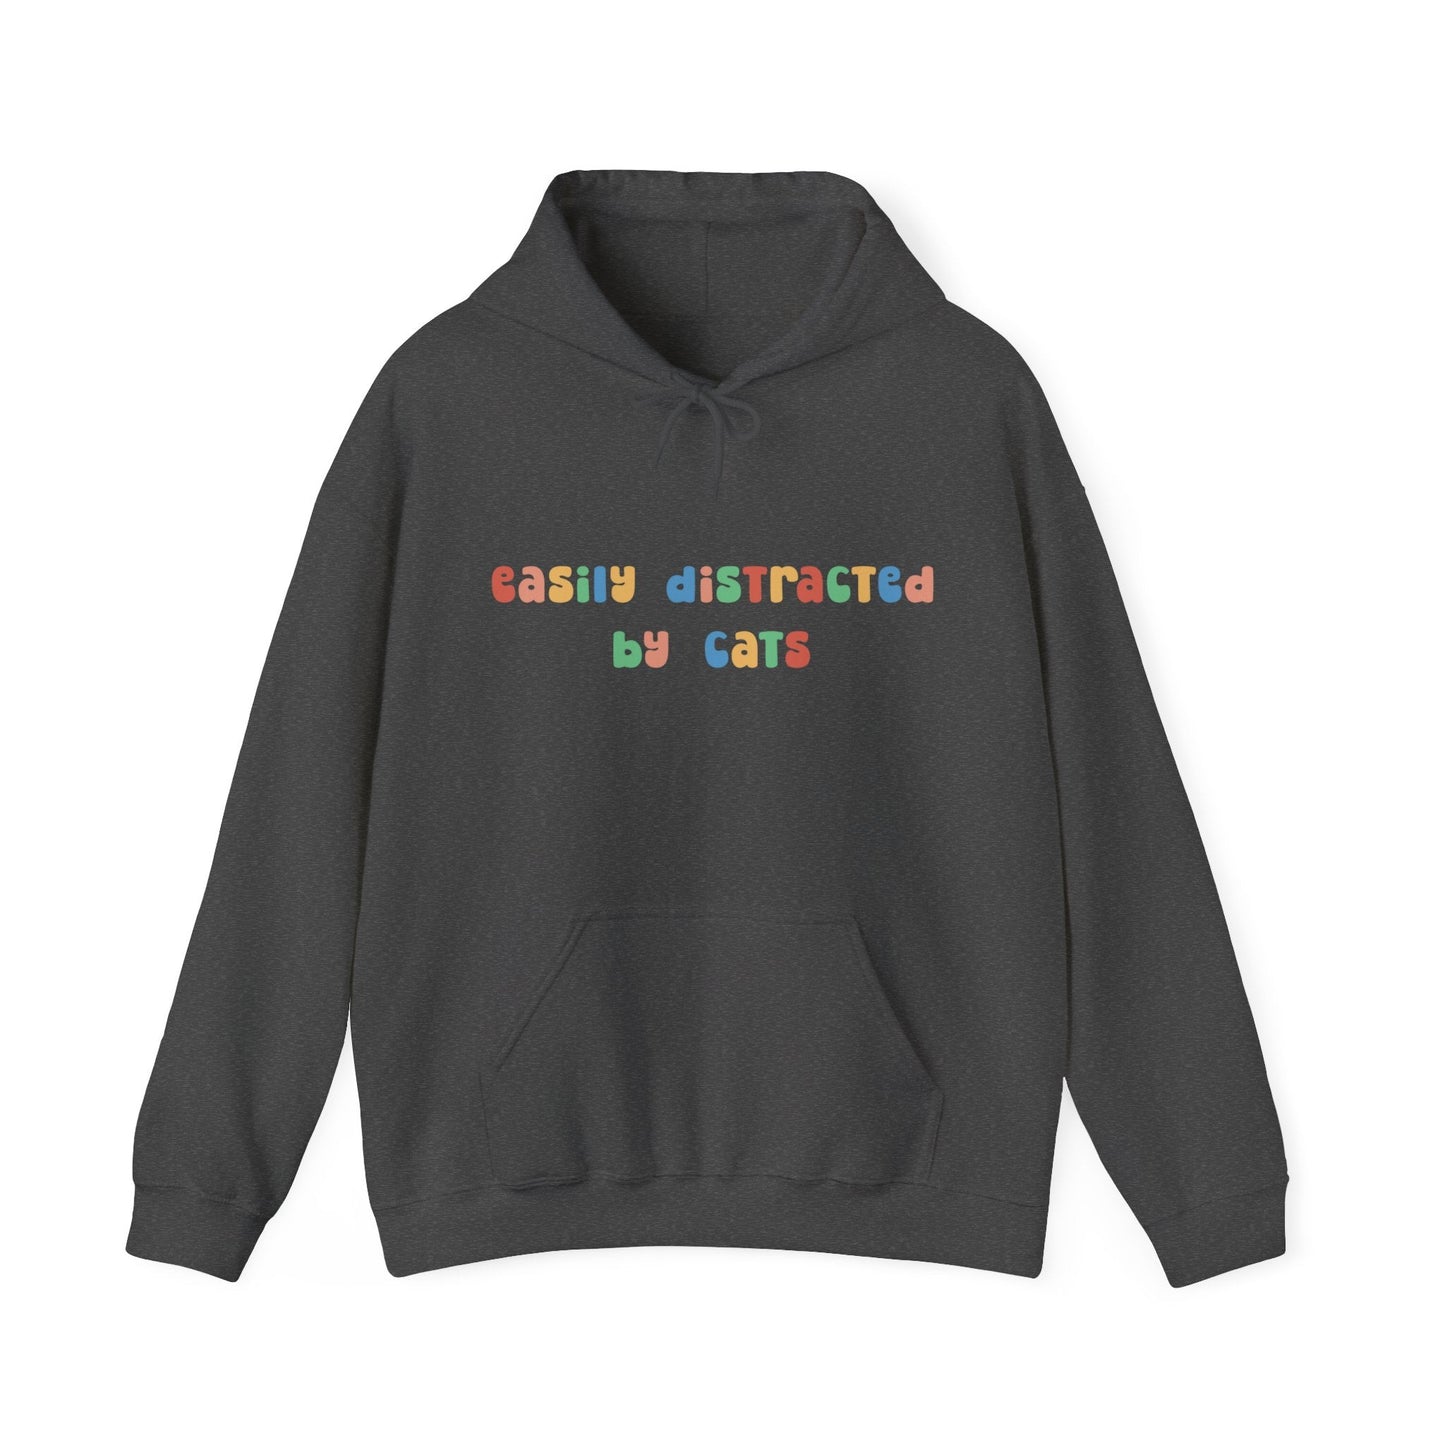 Easily Distracted by Cats | Hooded Sweatshirt - Detezi Designs-24735350219442996195